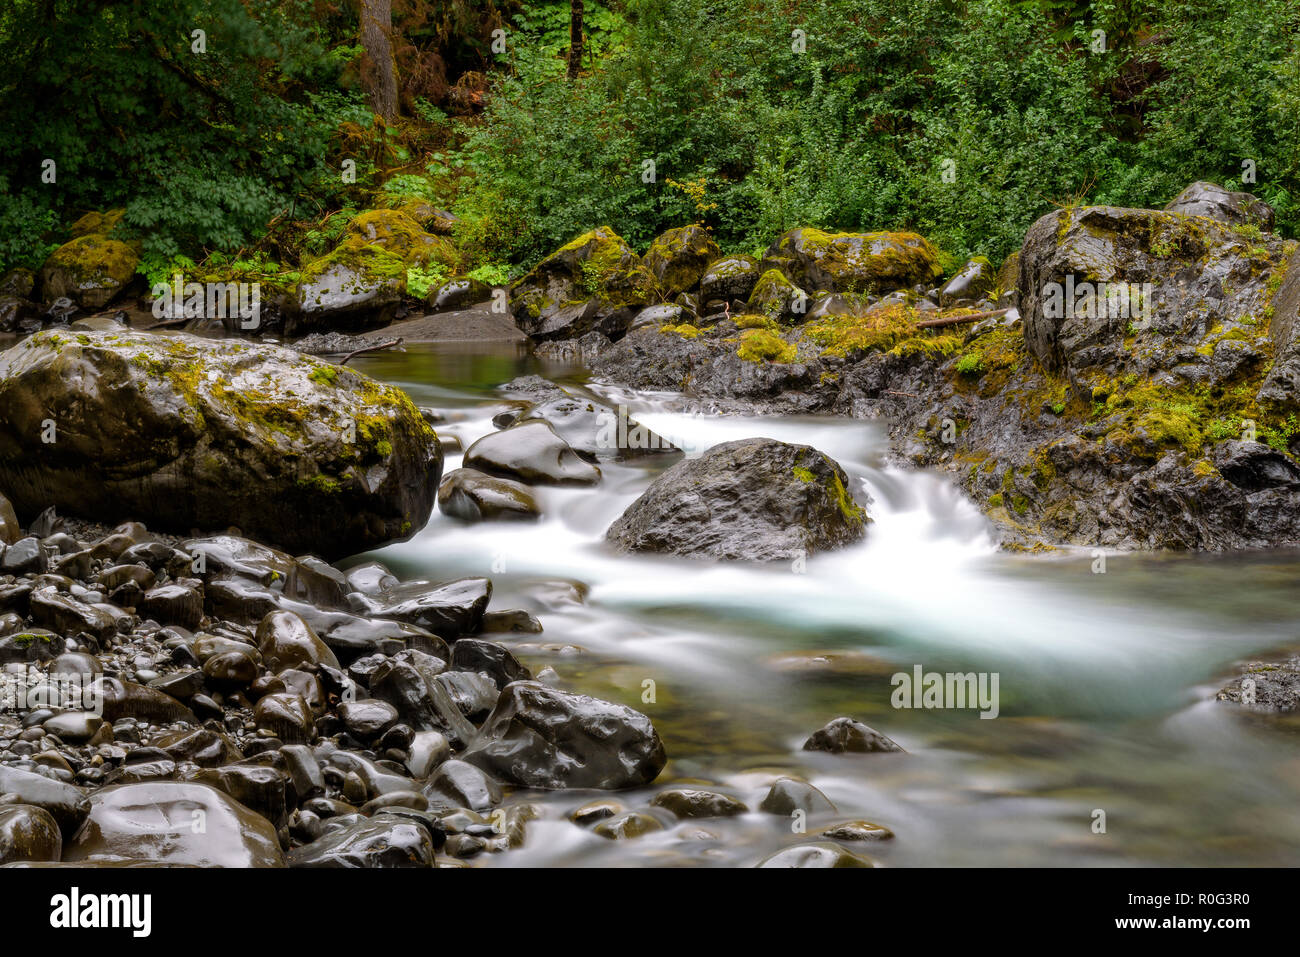 Long Exposure of a lush mountain river at twilight. Shot in the Pacific Northwest during autumn. Stock Photo